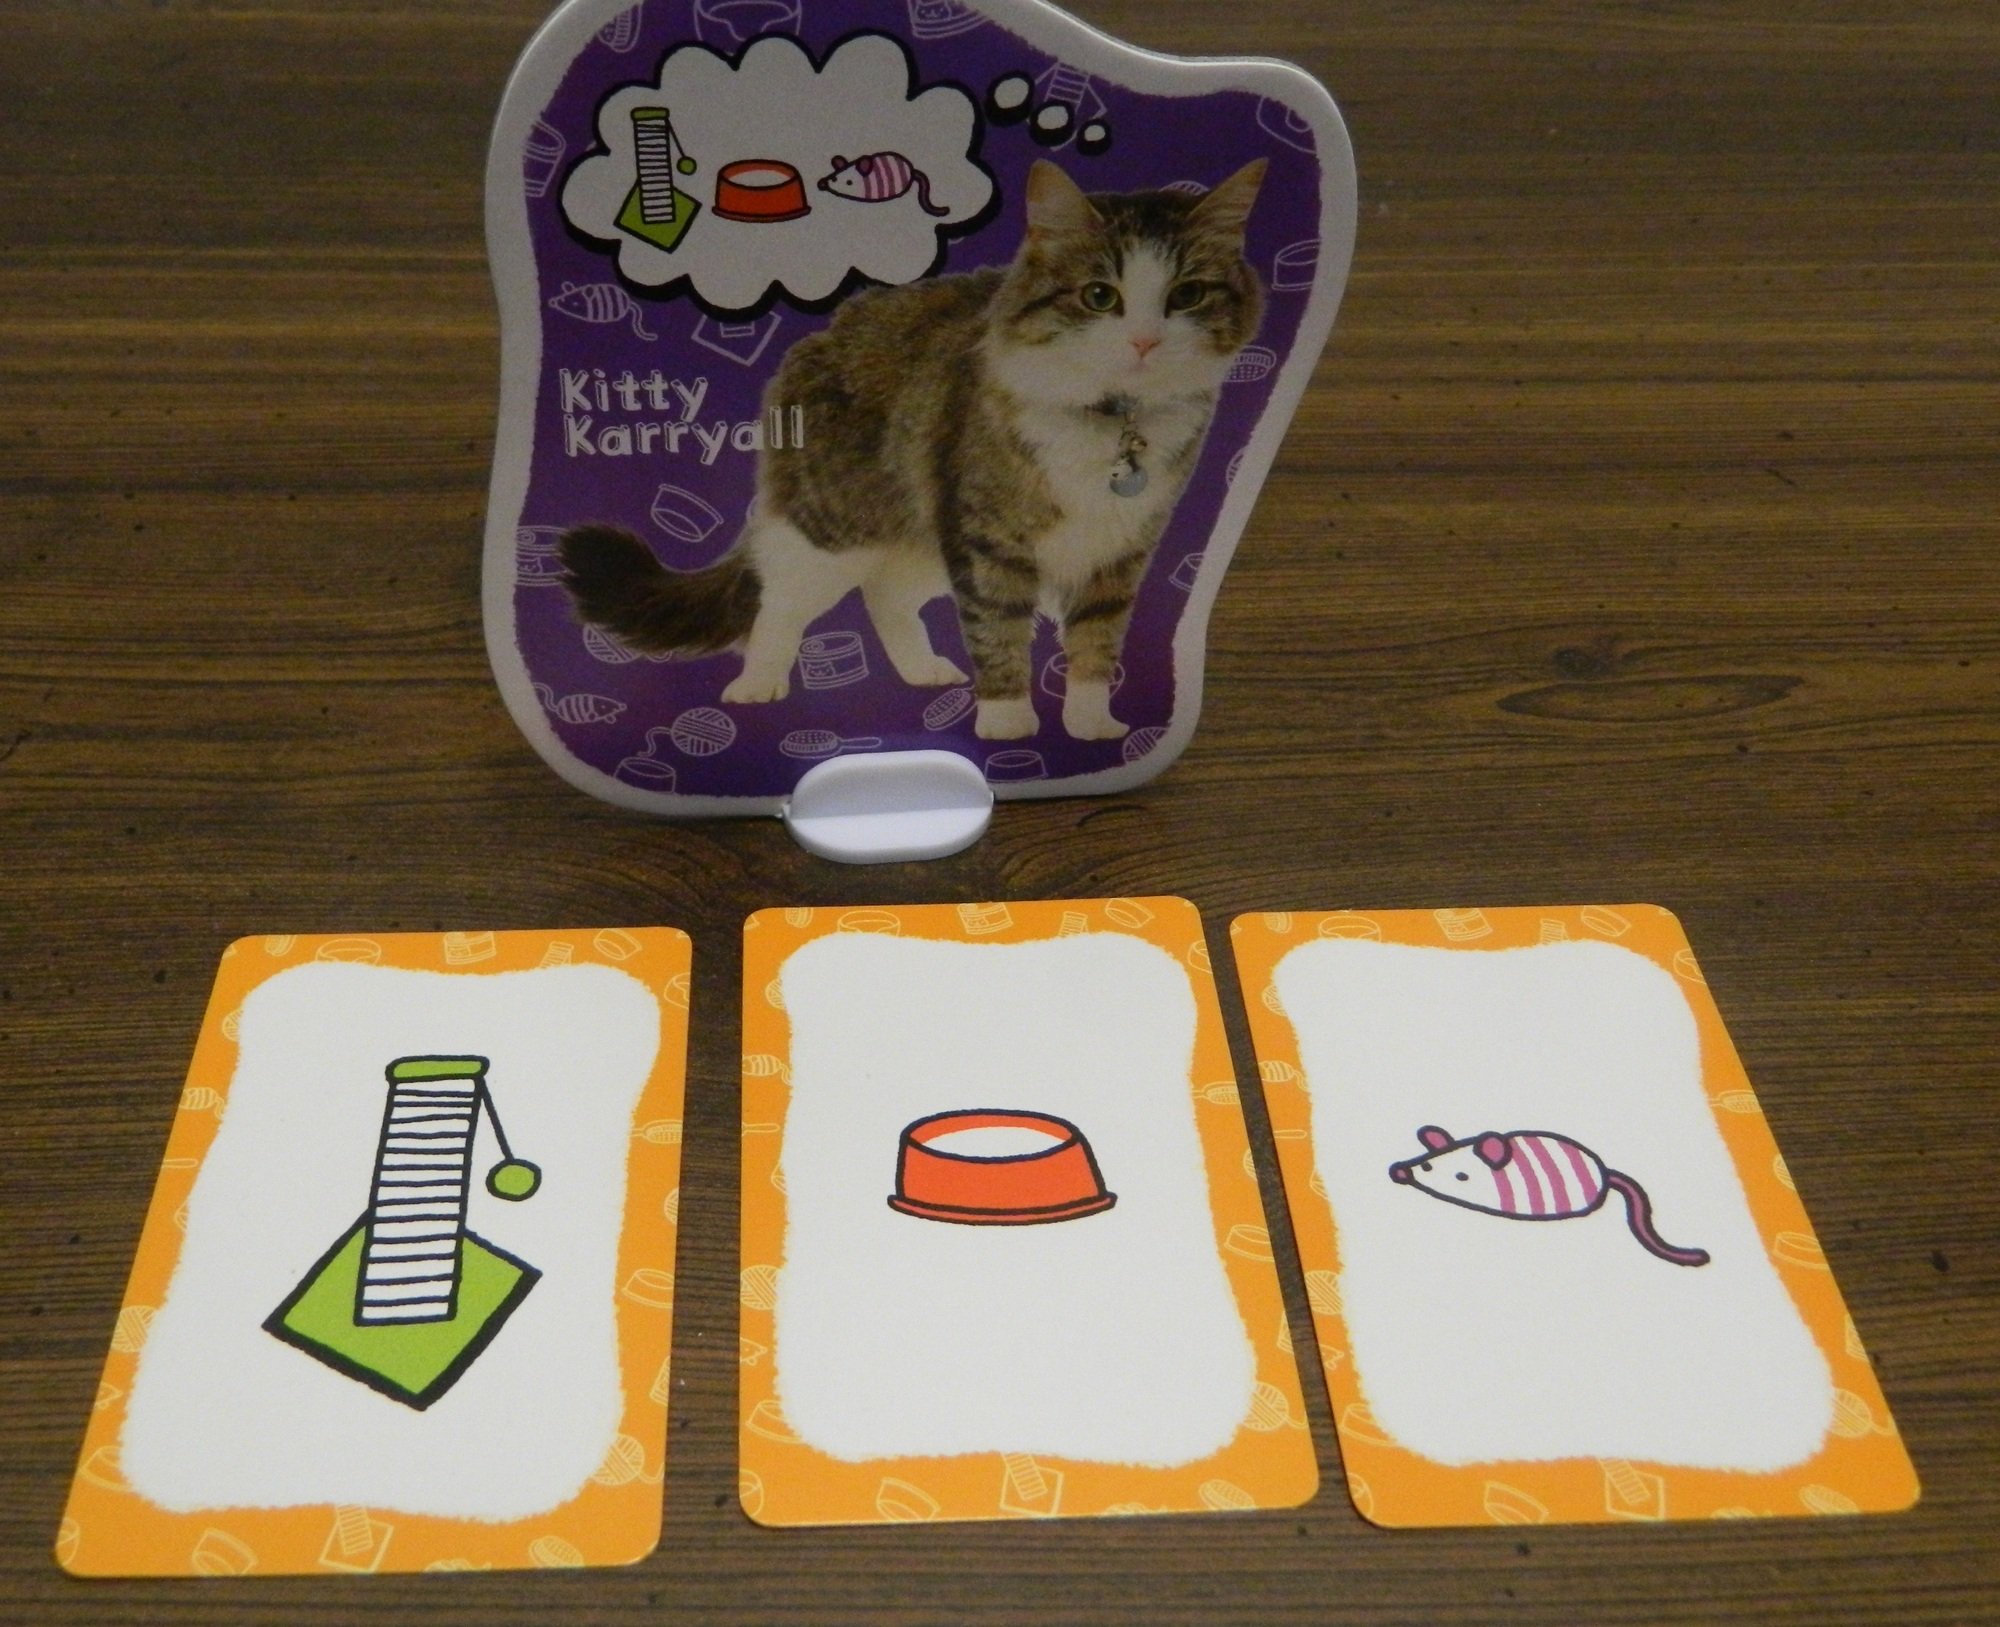 Kitten Caboodle Board Game Review and Rules - Geeky Hobbies